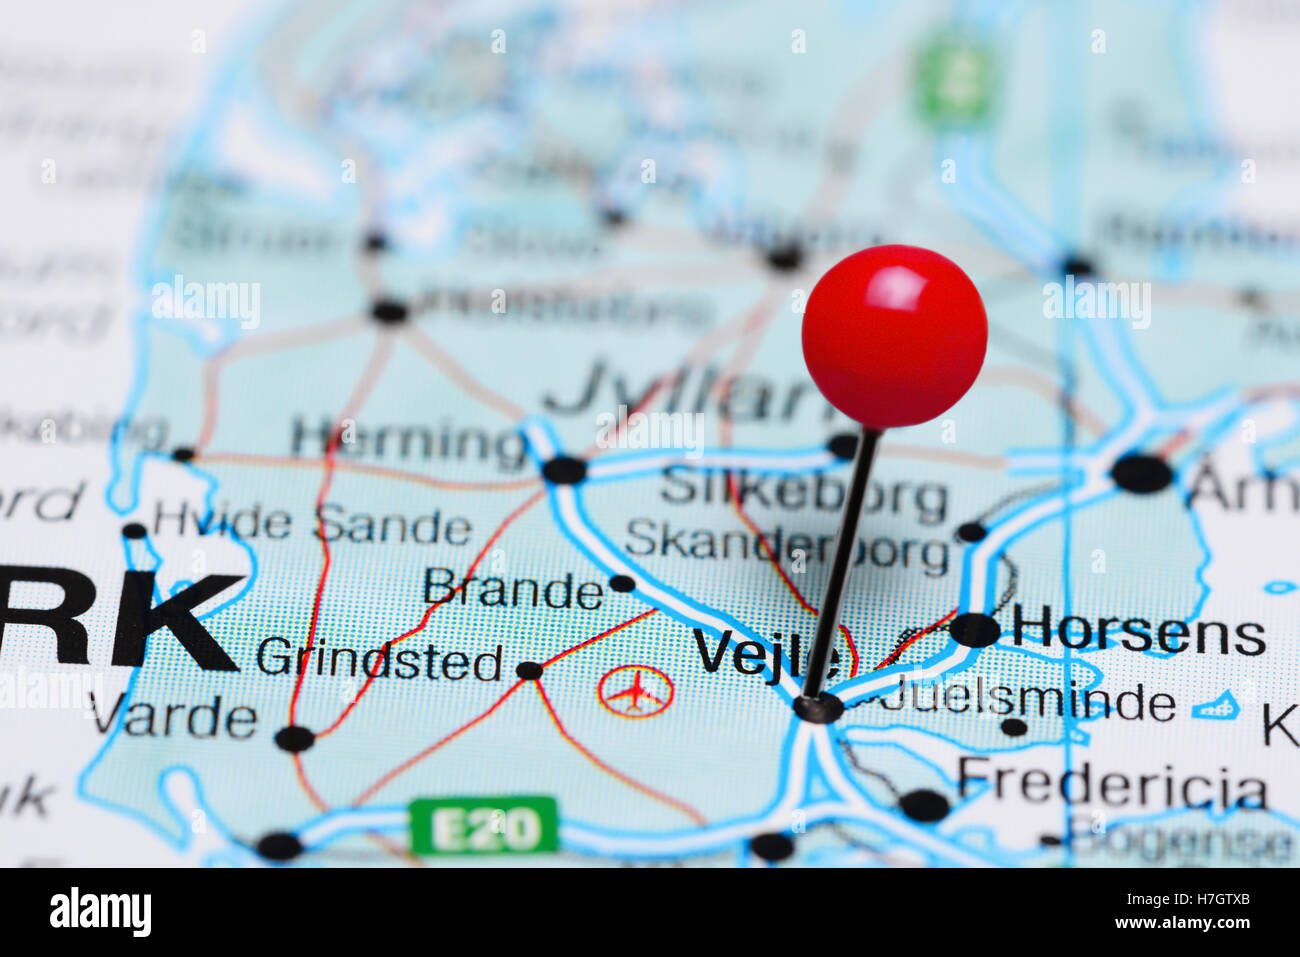 Vejle pinned on a map of Denmark Stock Photo